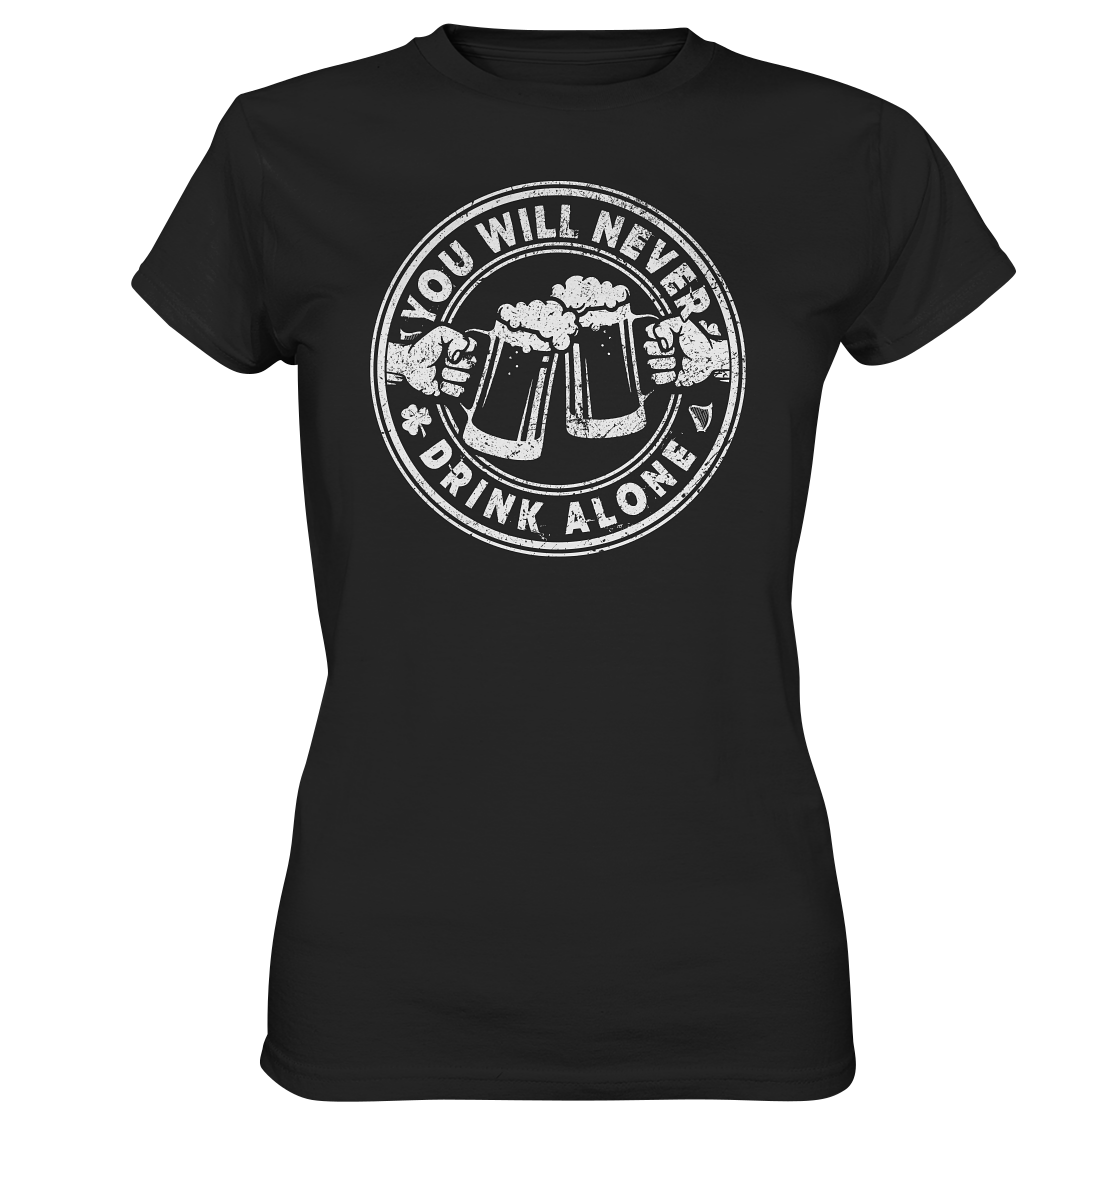 You will never drink alone - Ladies Premium Shirt